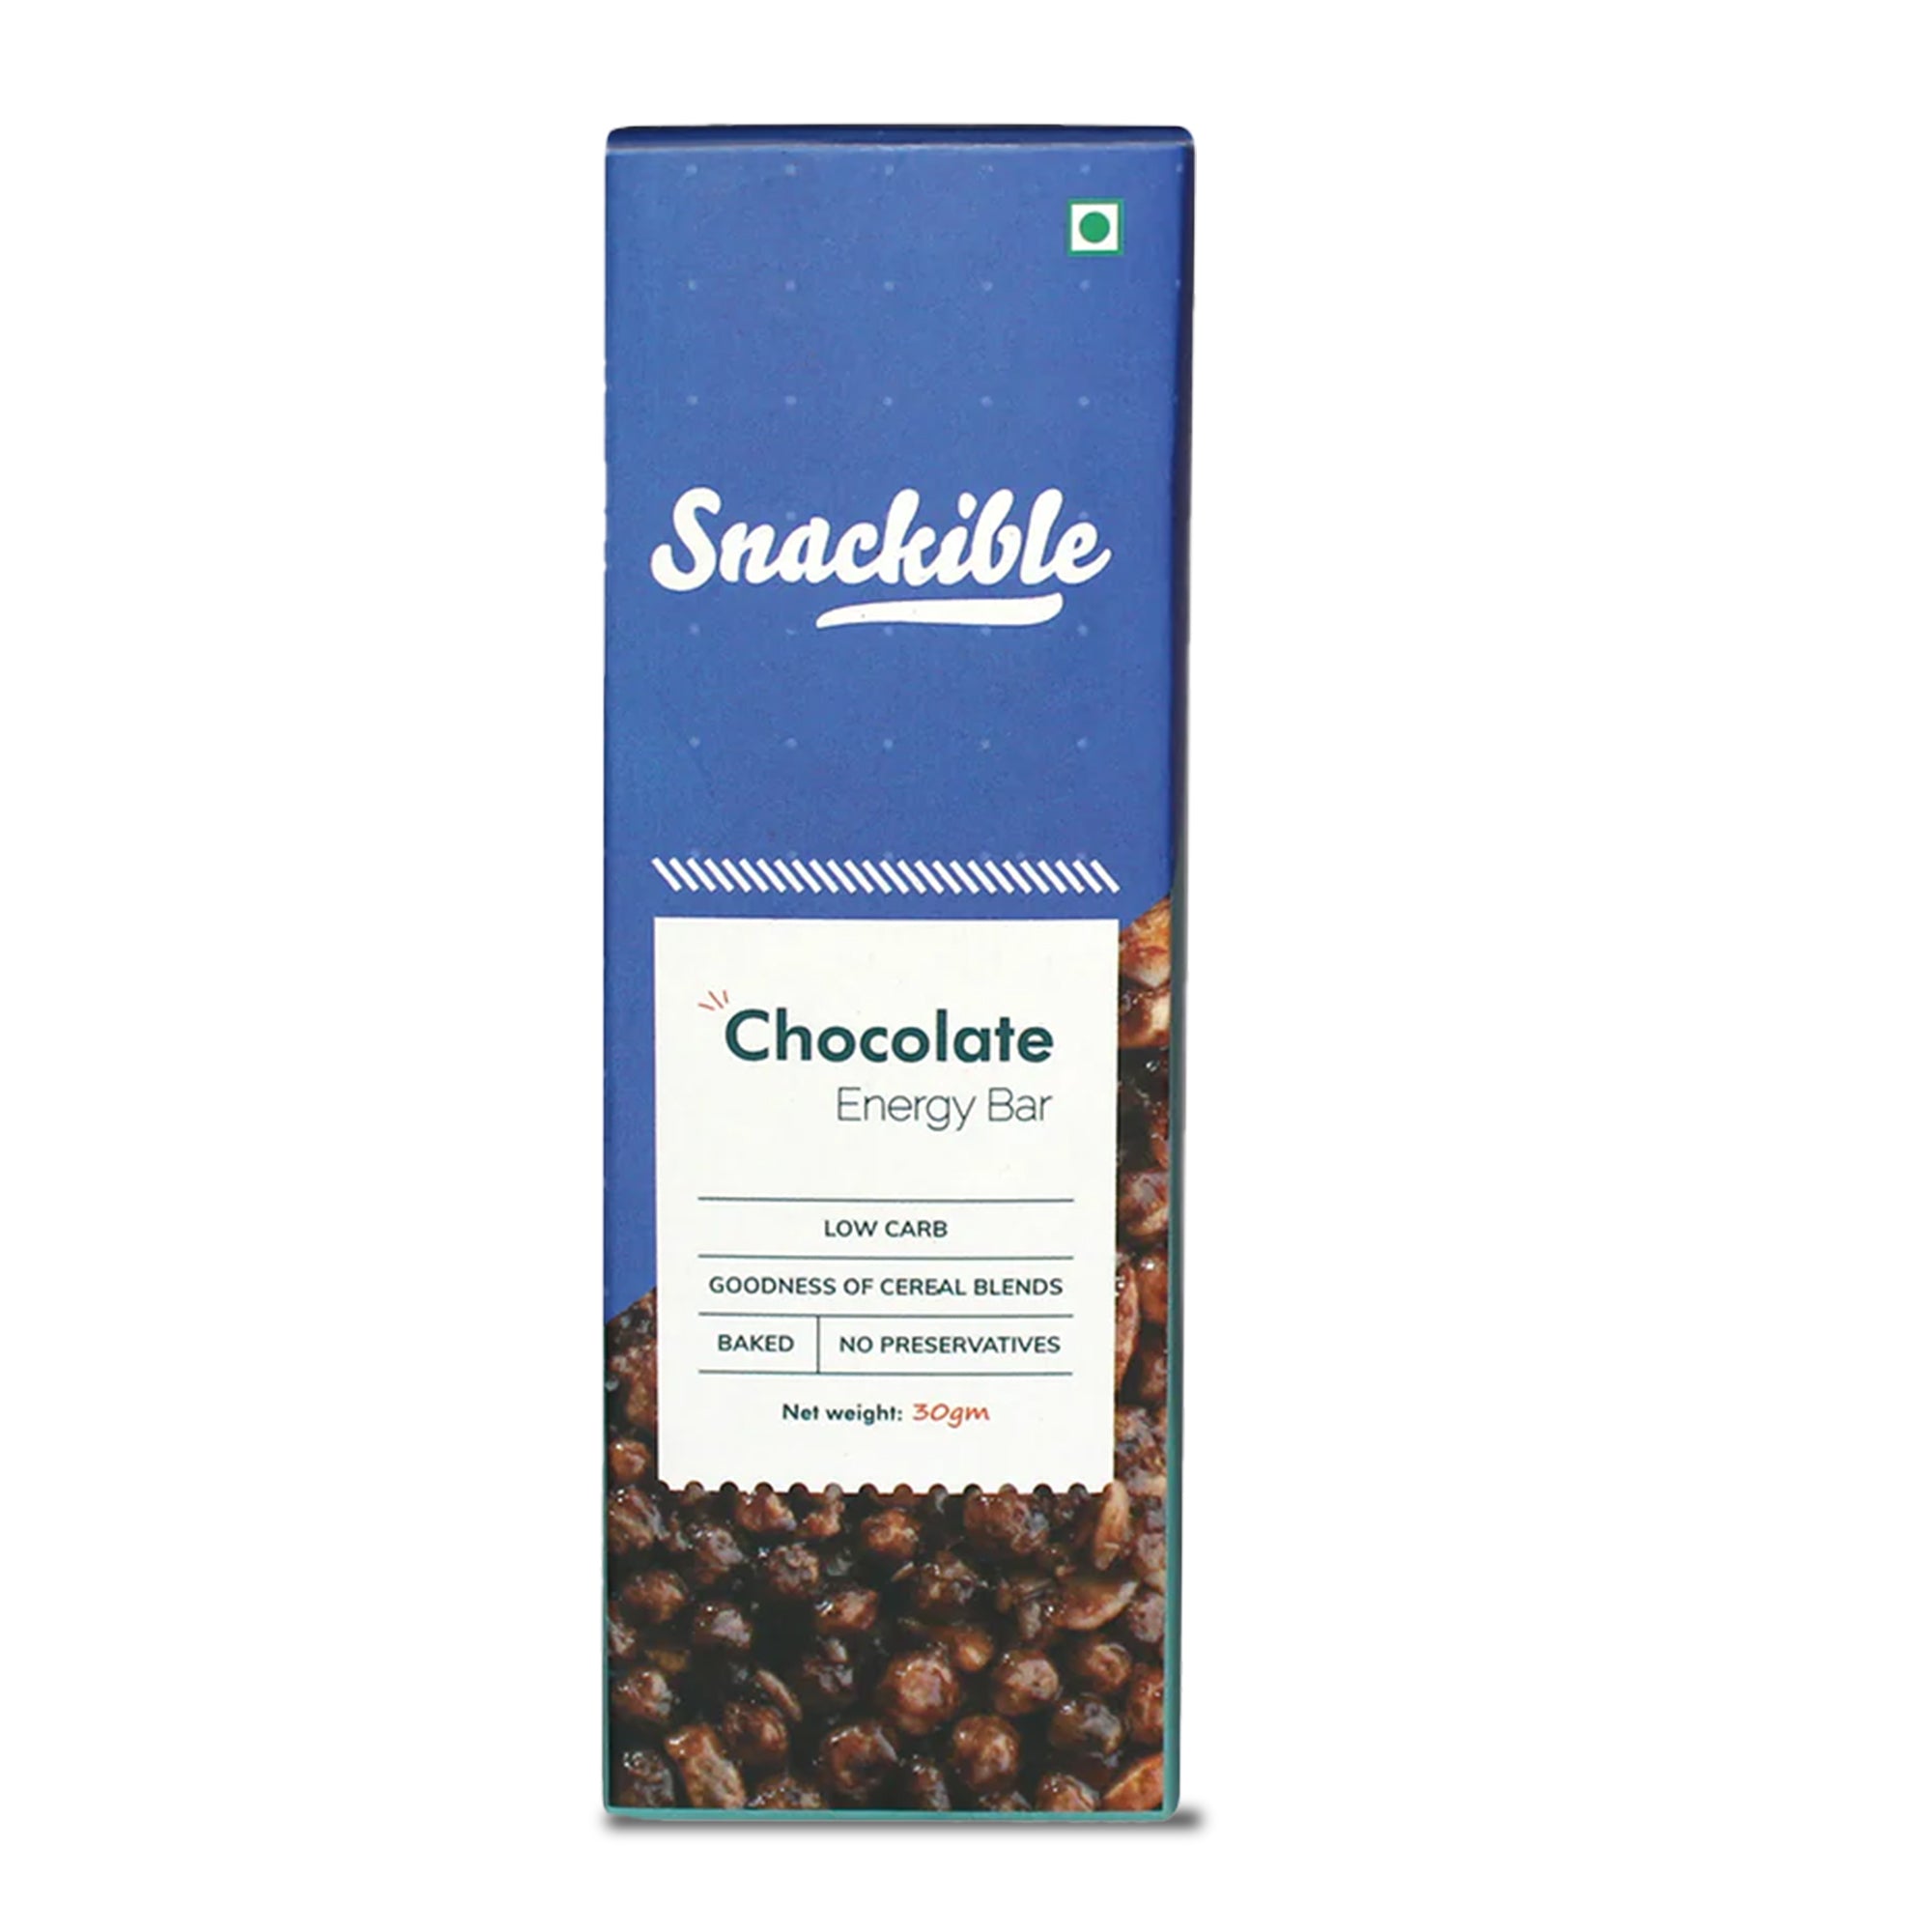 Snackible Chocolate Energy Bar - 30gm | Pack of 4